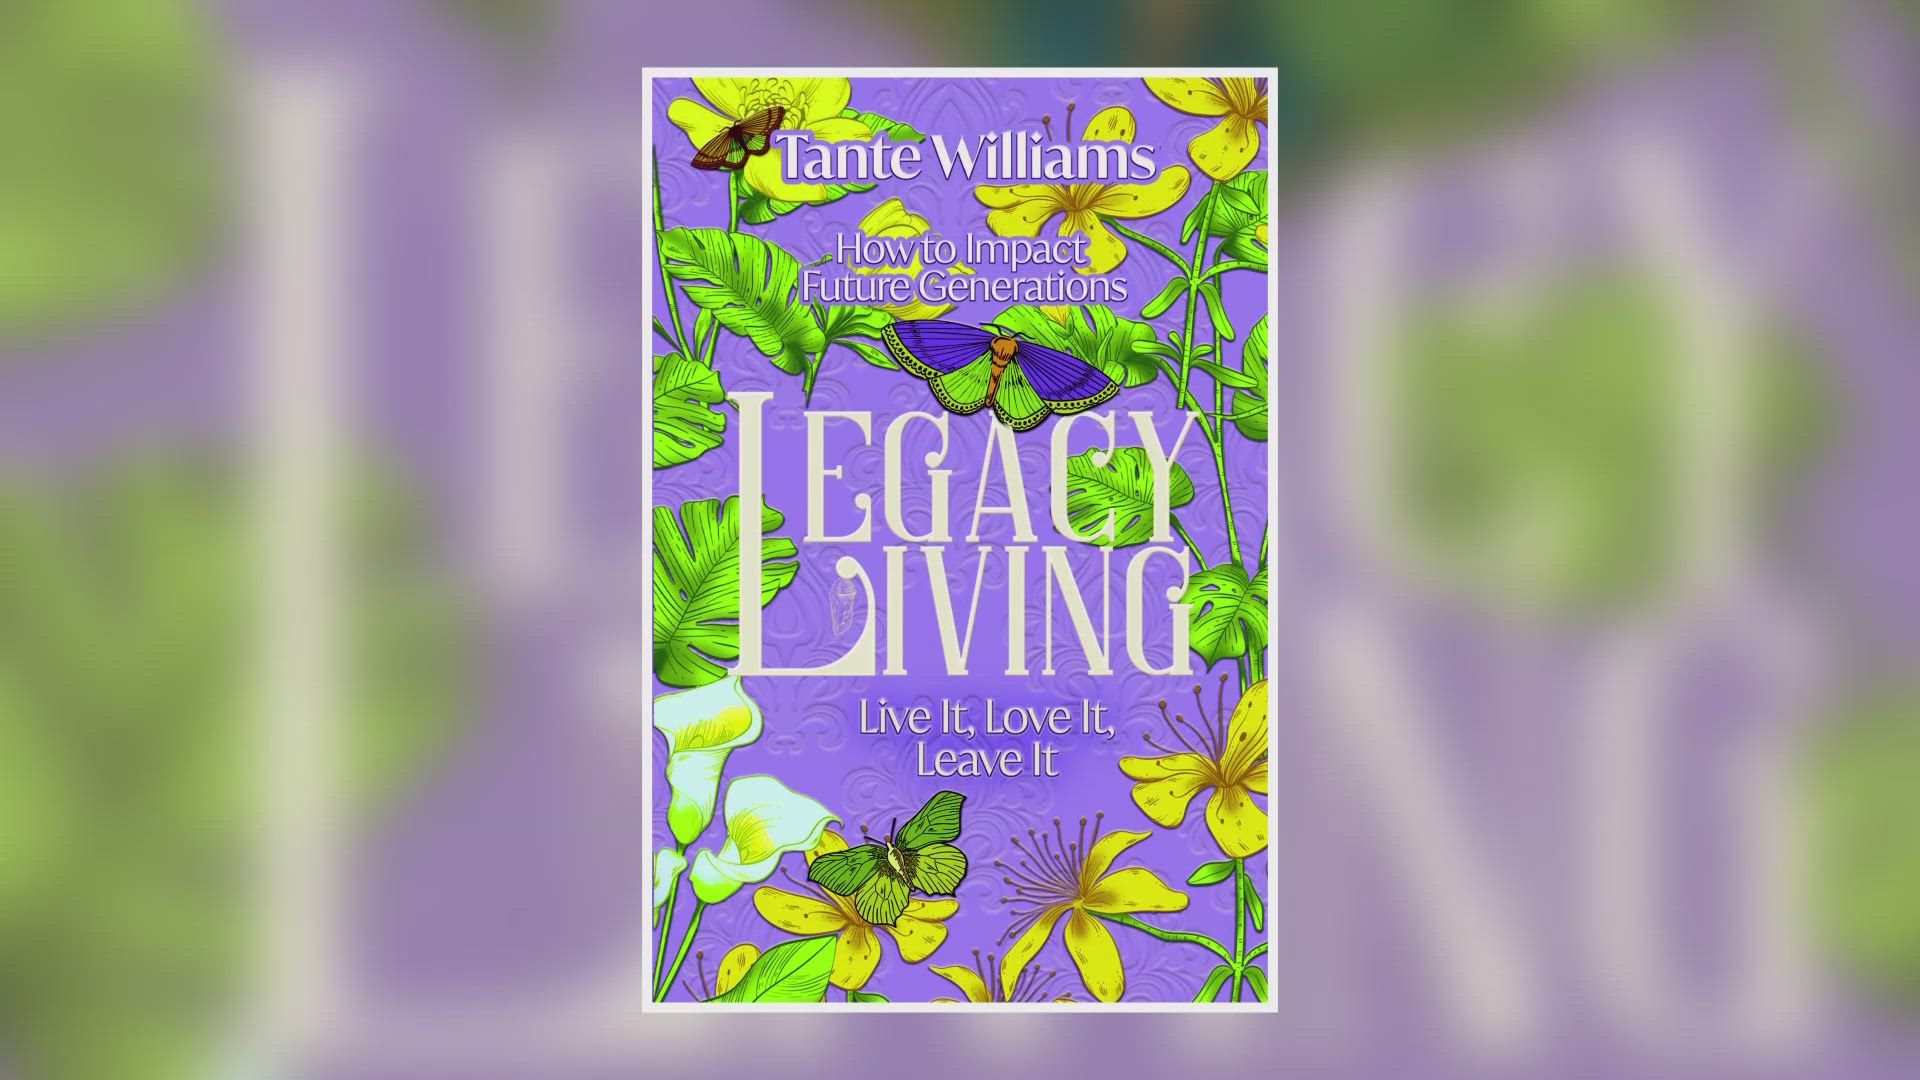 A North Texas author released her newest book titled "Legacy Living." The goal is to help the reader visualize the impact they want to have on others.